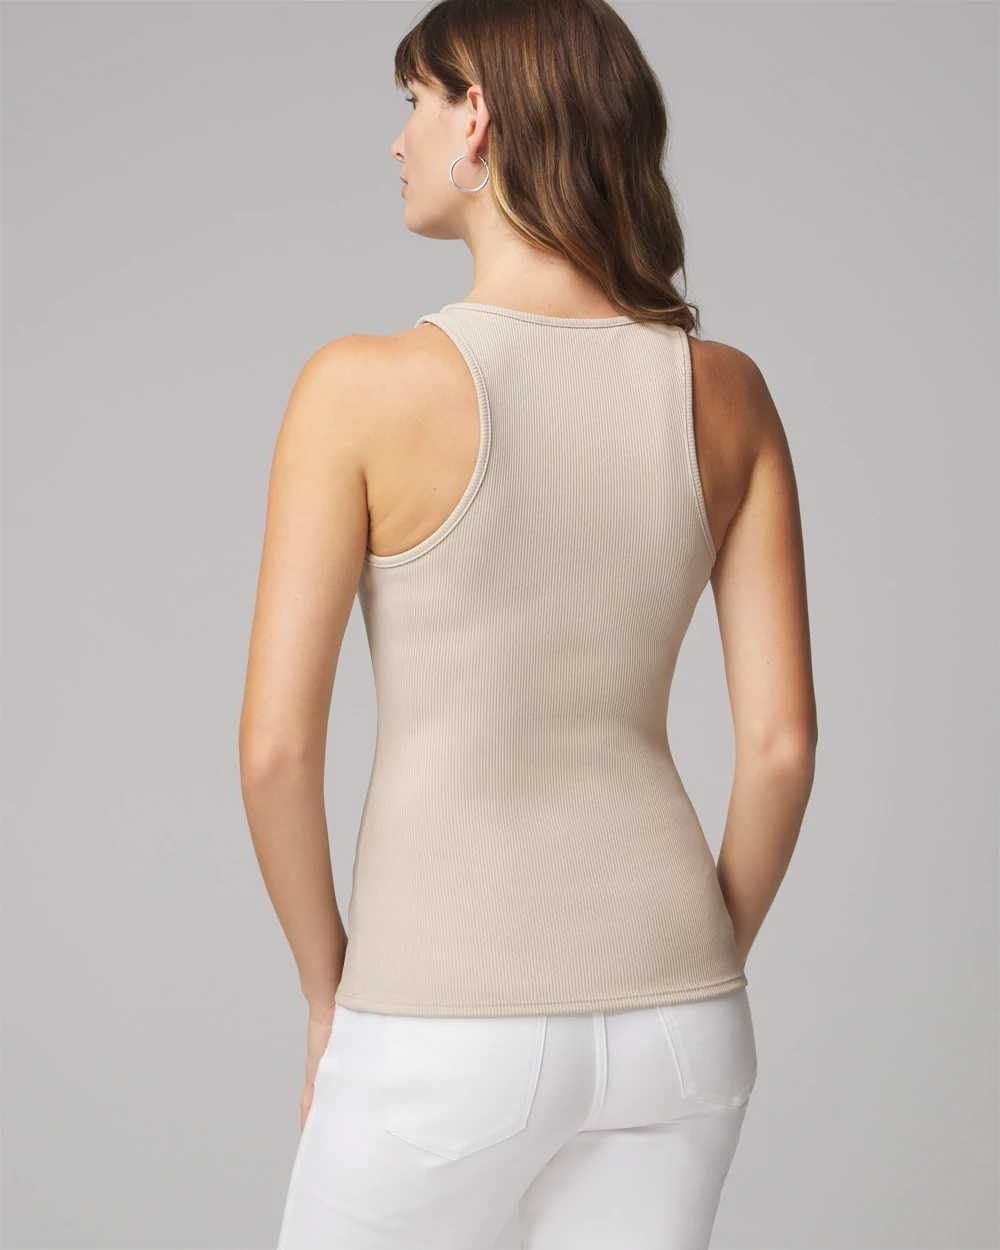 WHBM® FORME Rib Tank click to view larger image.